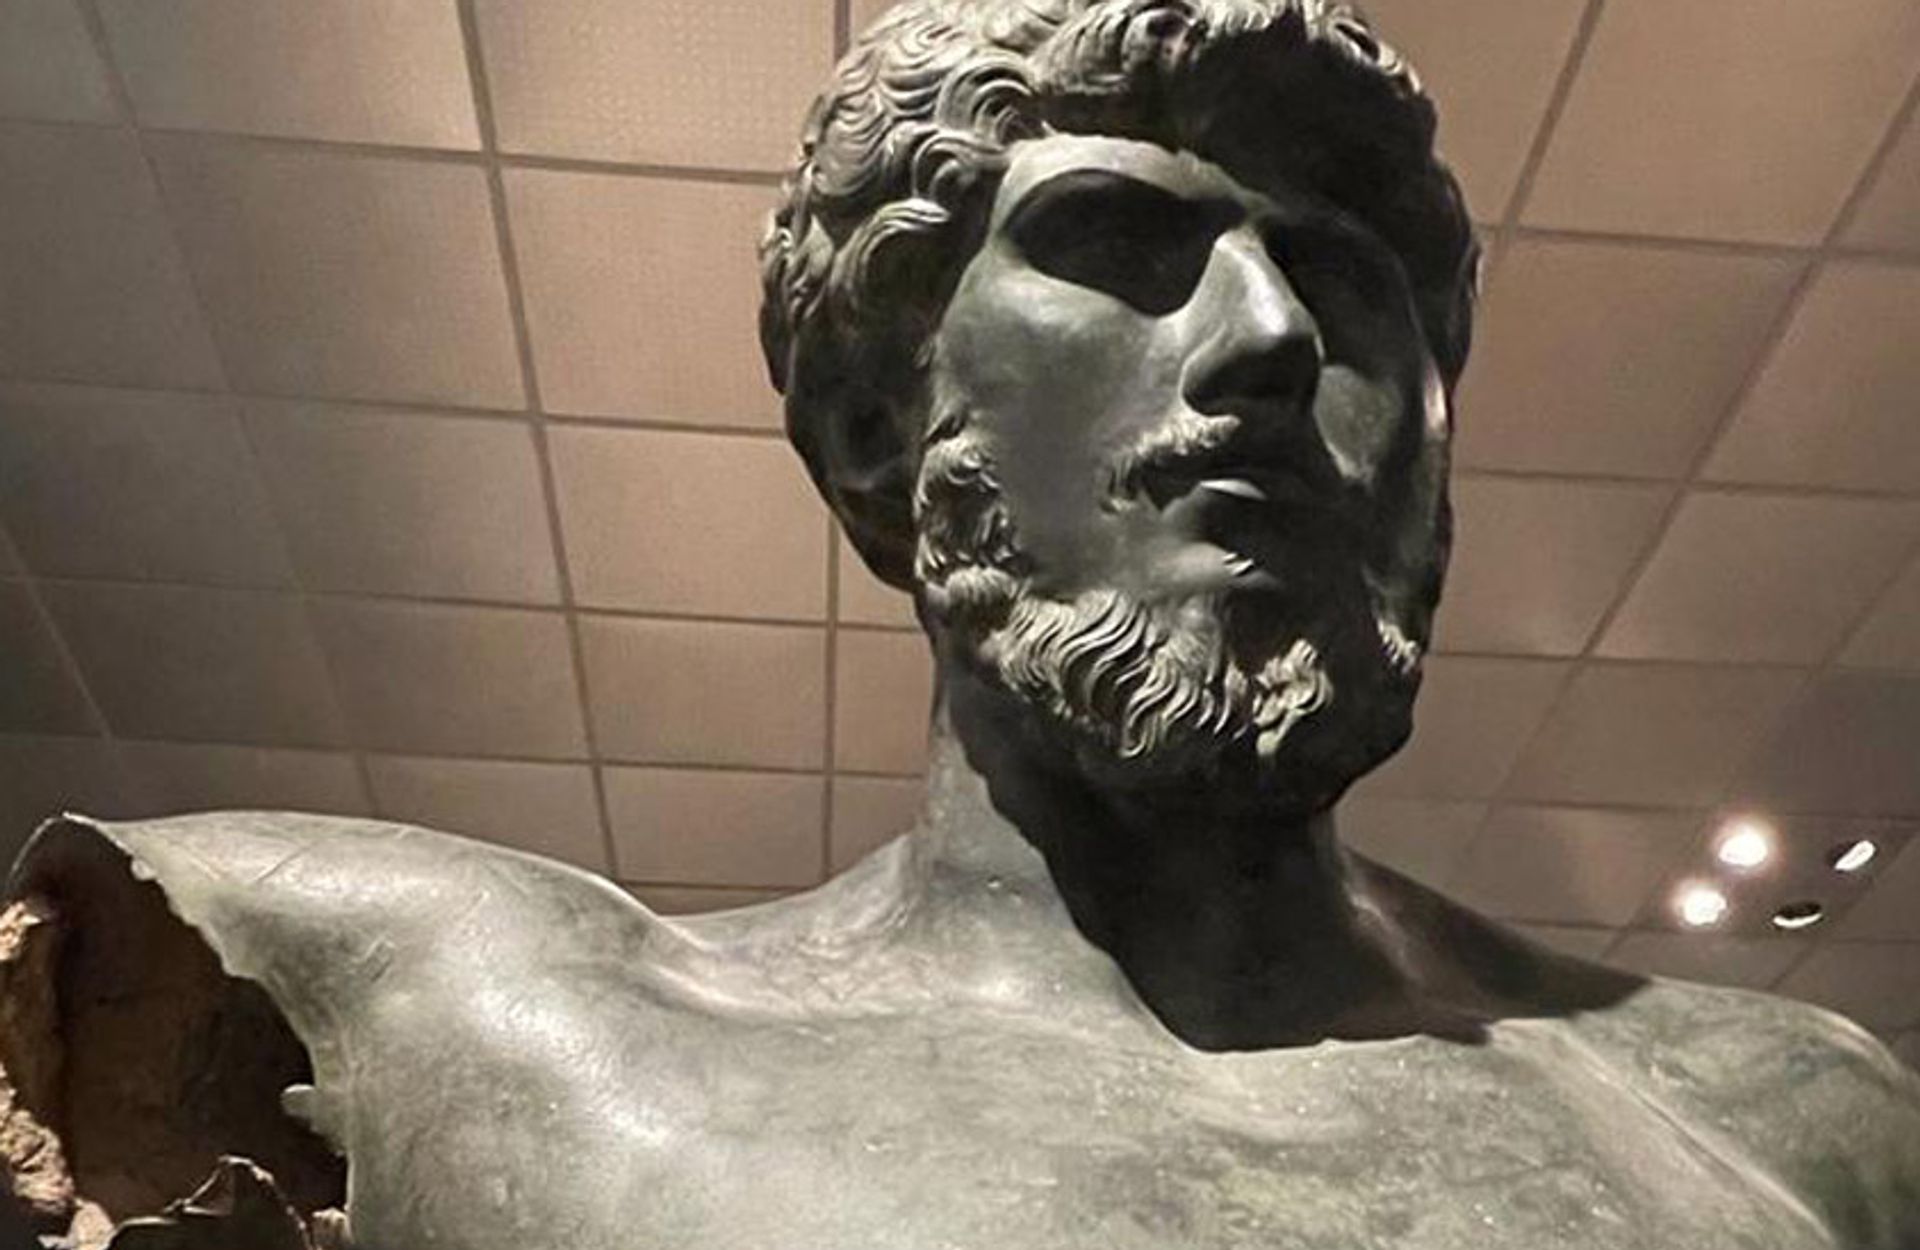 The antiquities collector Shelby White has been revealed as the former owner of a number of looted artefacts recently returned to Turkey, including a life-size bronze statue of the Roman Emperor Lucius Verus Courtesy of the US Consulate General, Istanbul via Facebook